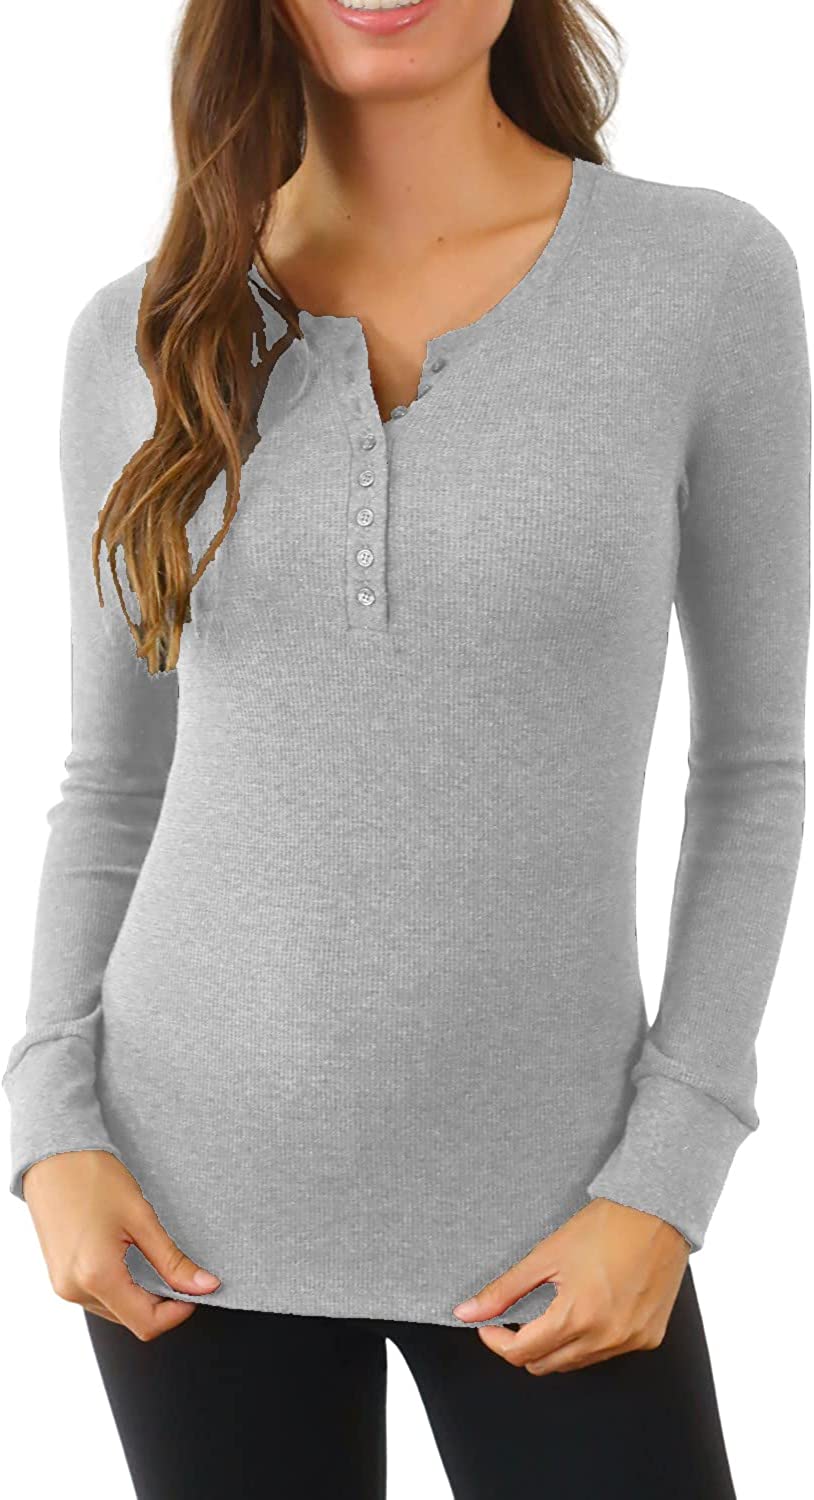 Cotton Thermal Underwear for Women,V Neck Thermal Shirts for Women